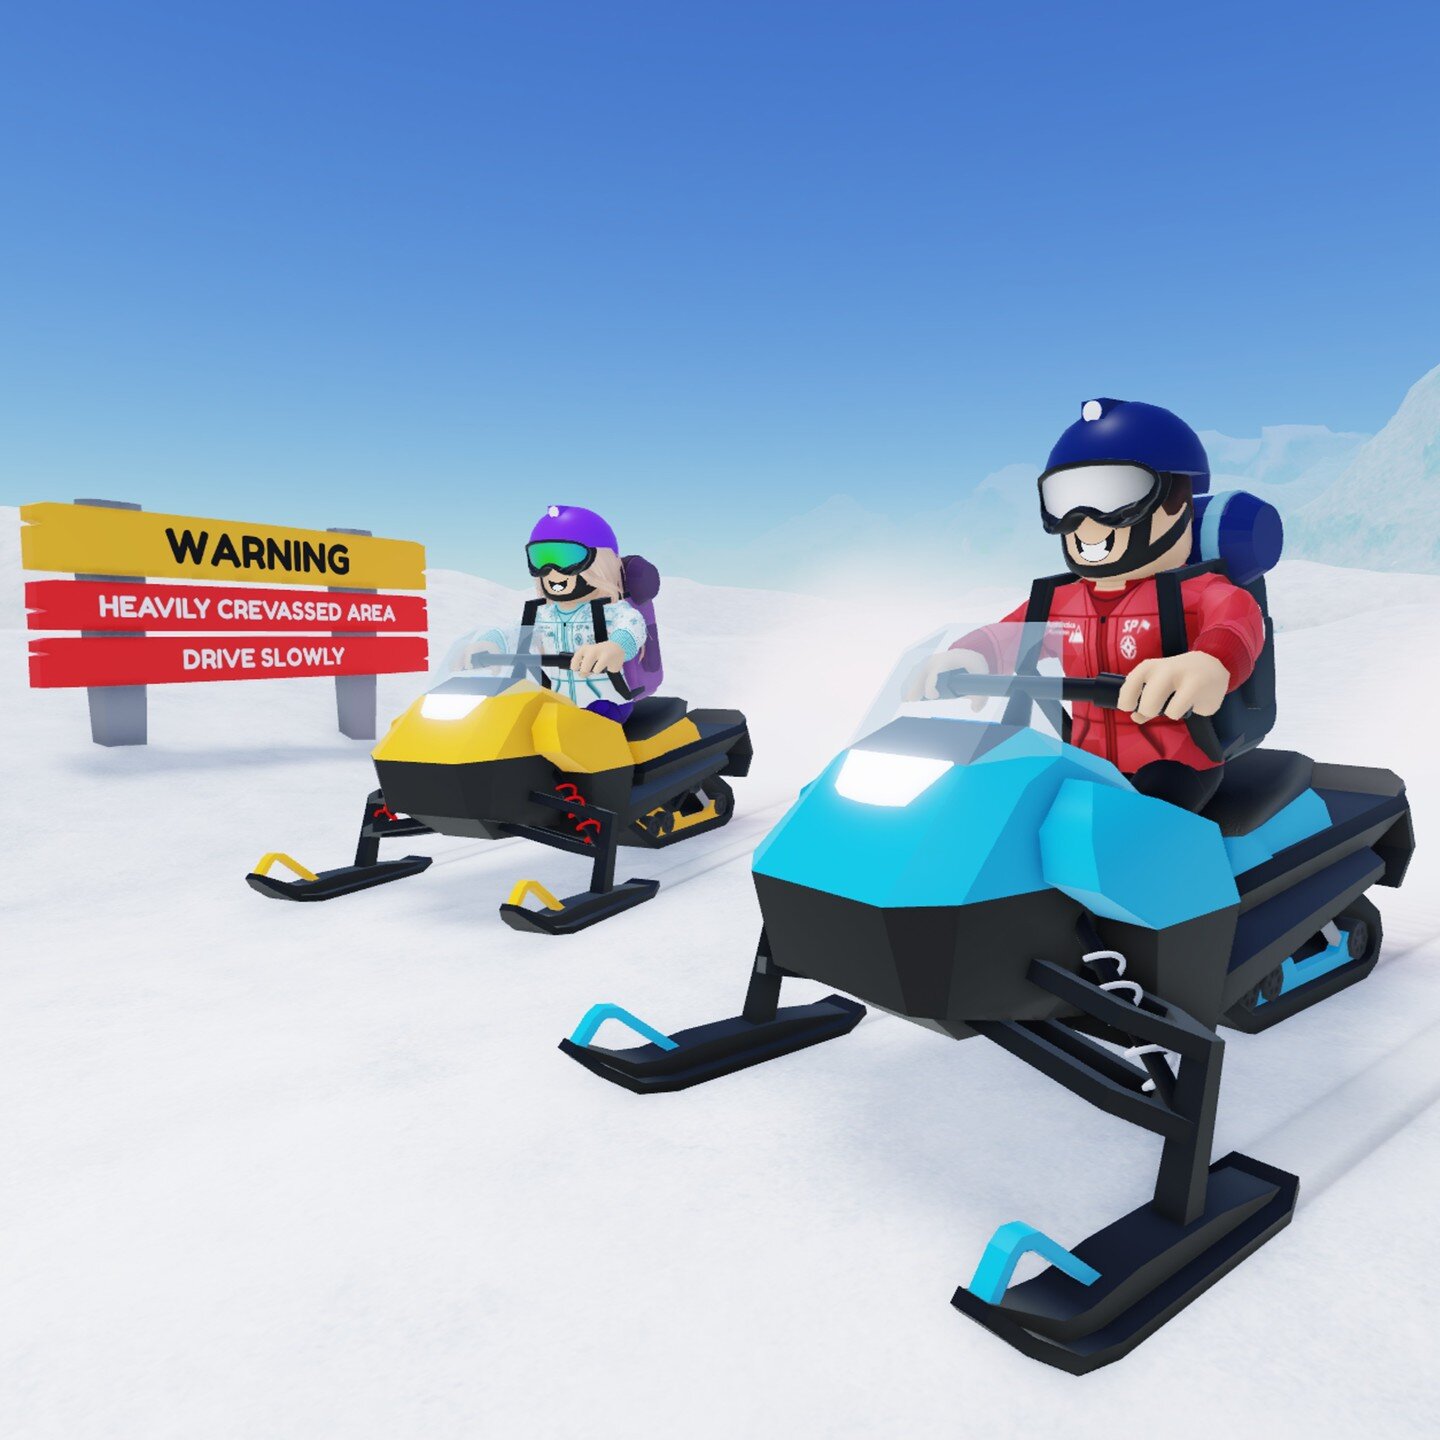 Snowmobiles arriving soon to Expedition Antarctica! Who's excited? 😁
#roblox #expeditionantarctica